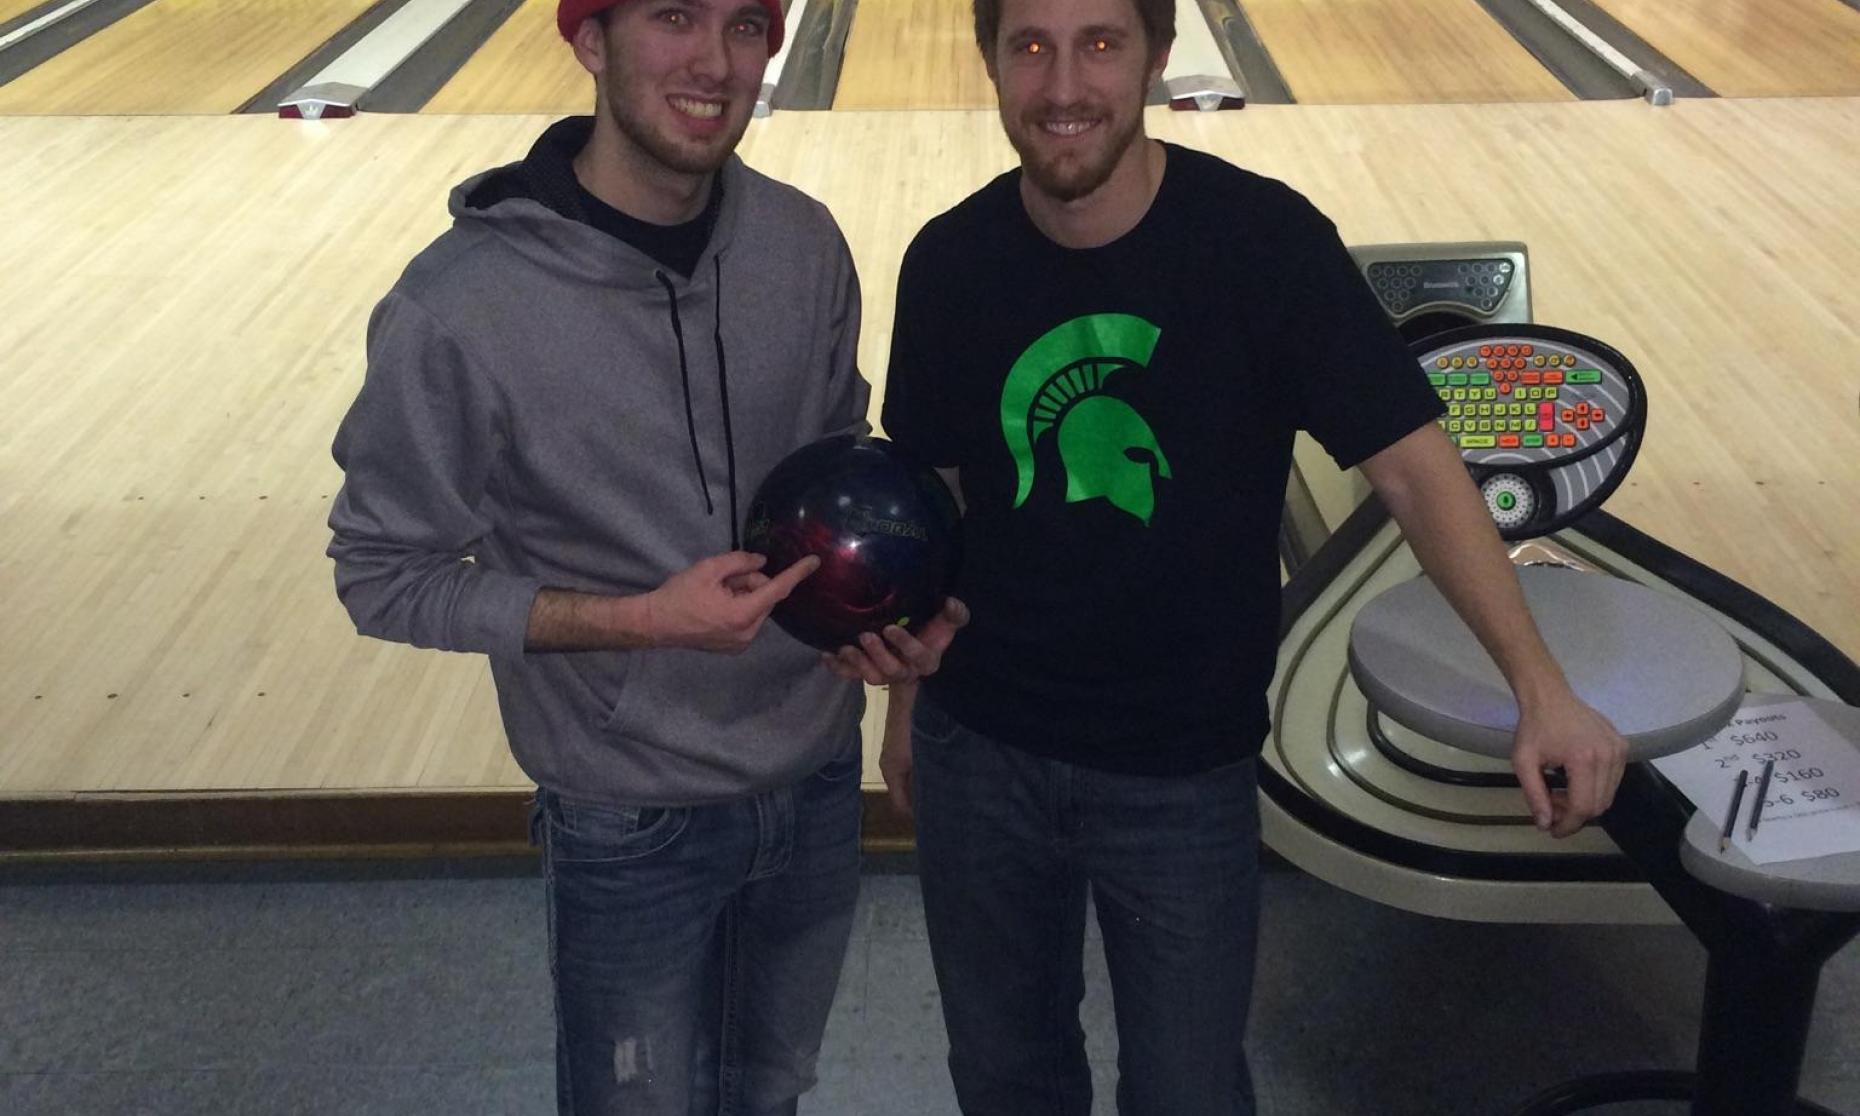 Tournament Champions Kyle King (left) and Dan Pollak (right)